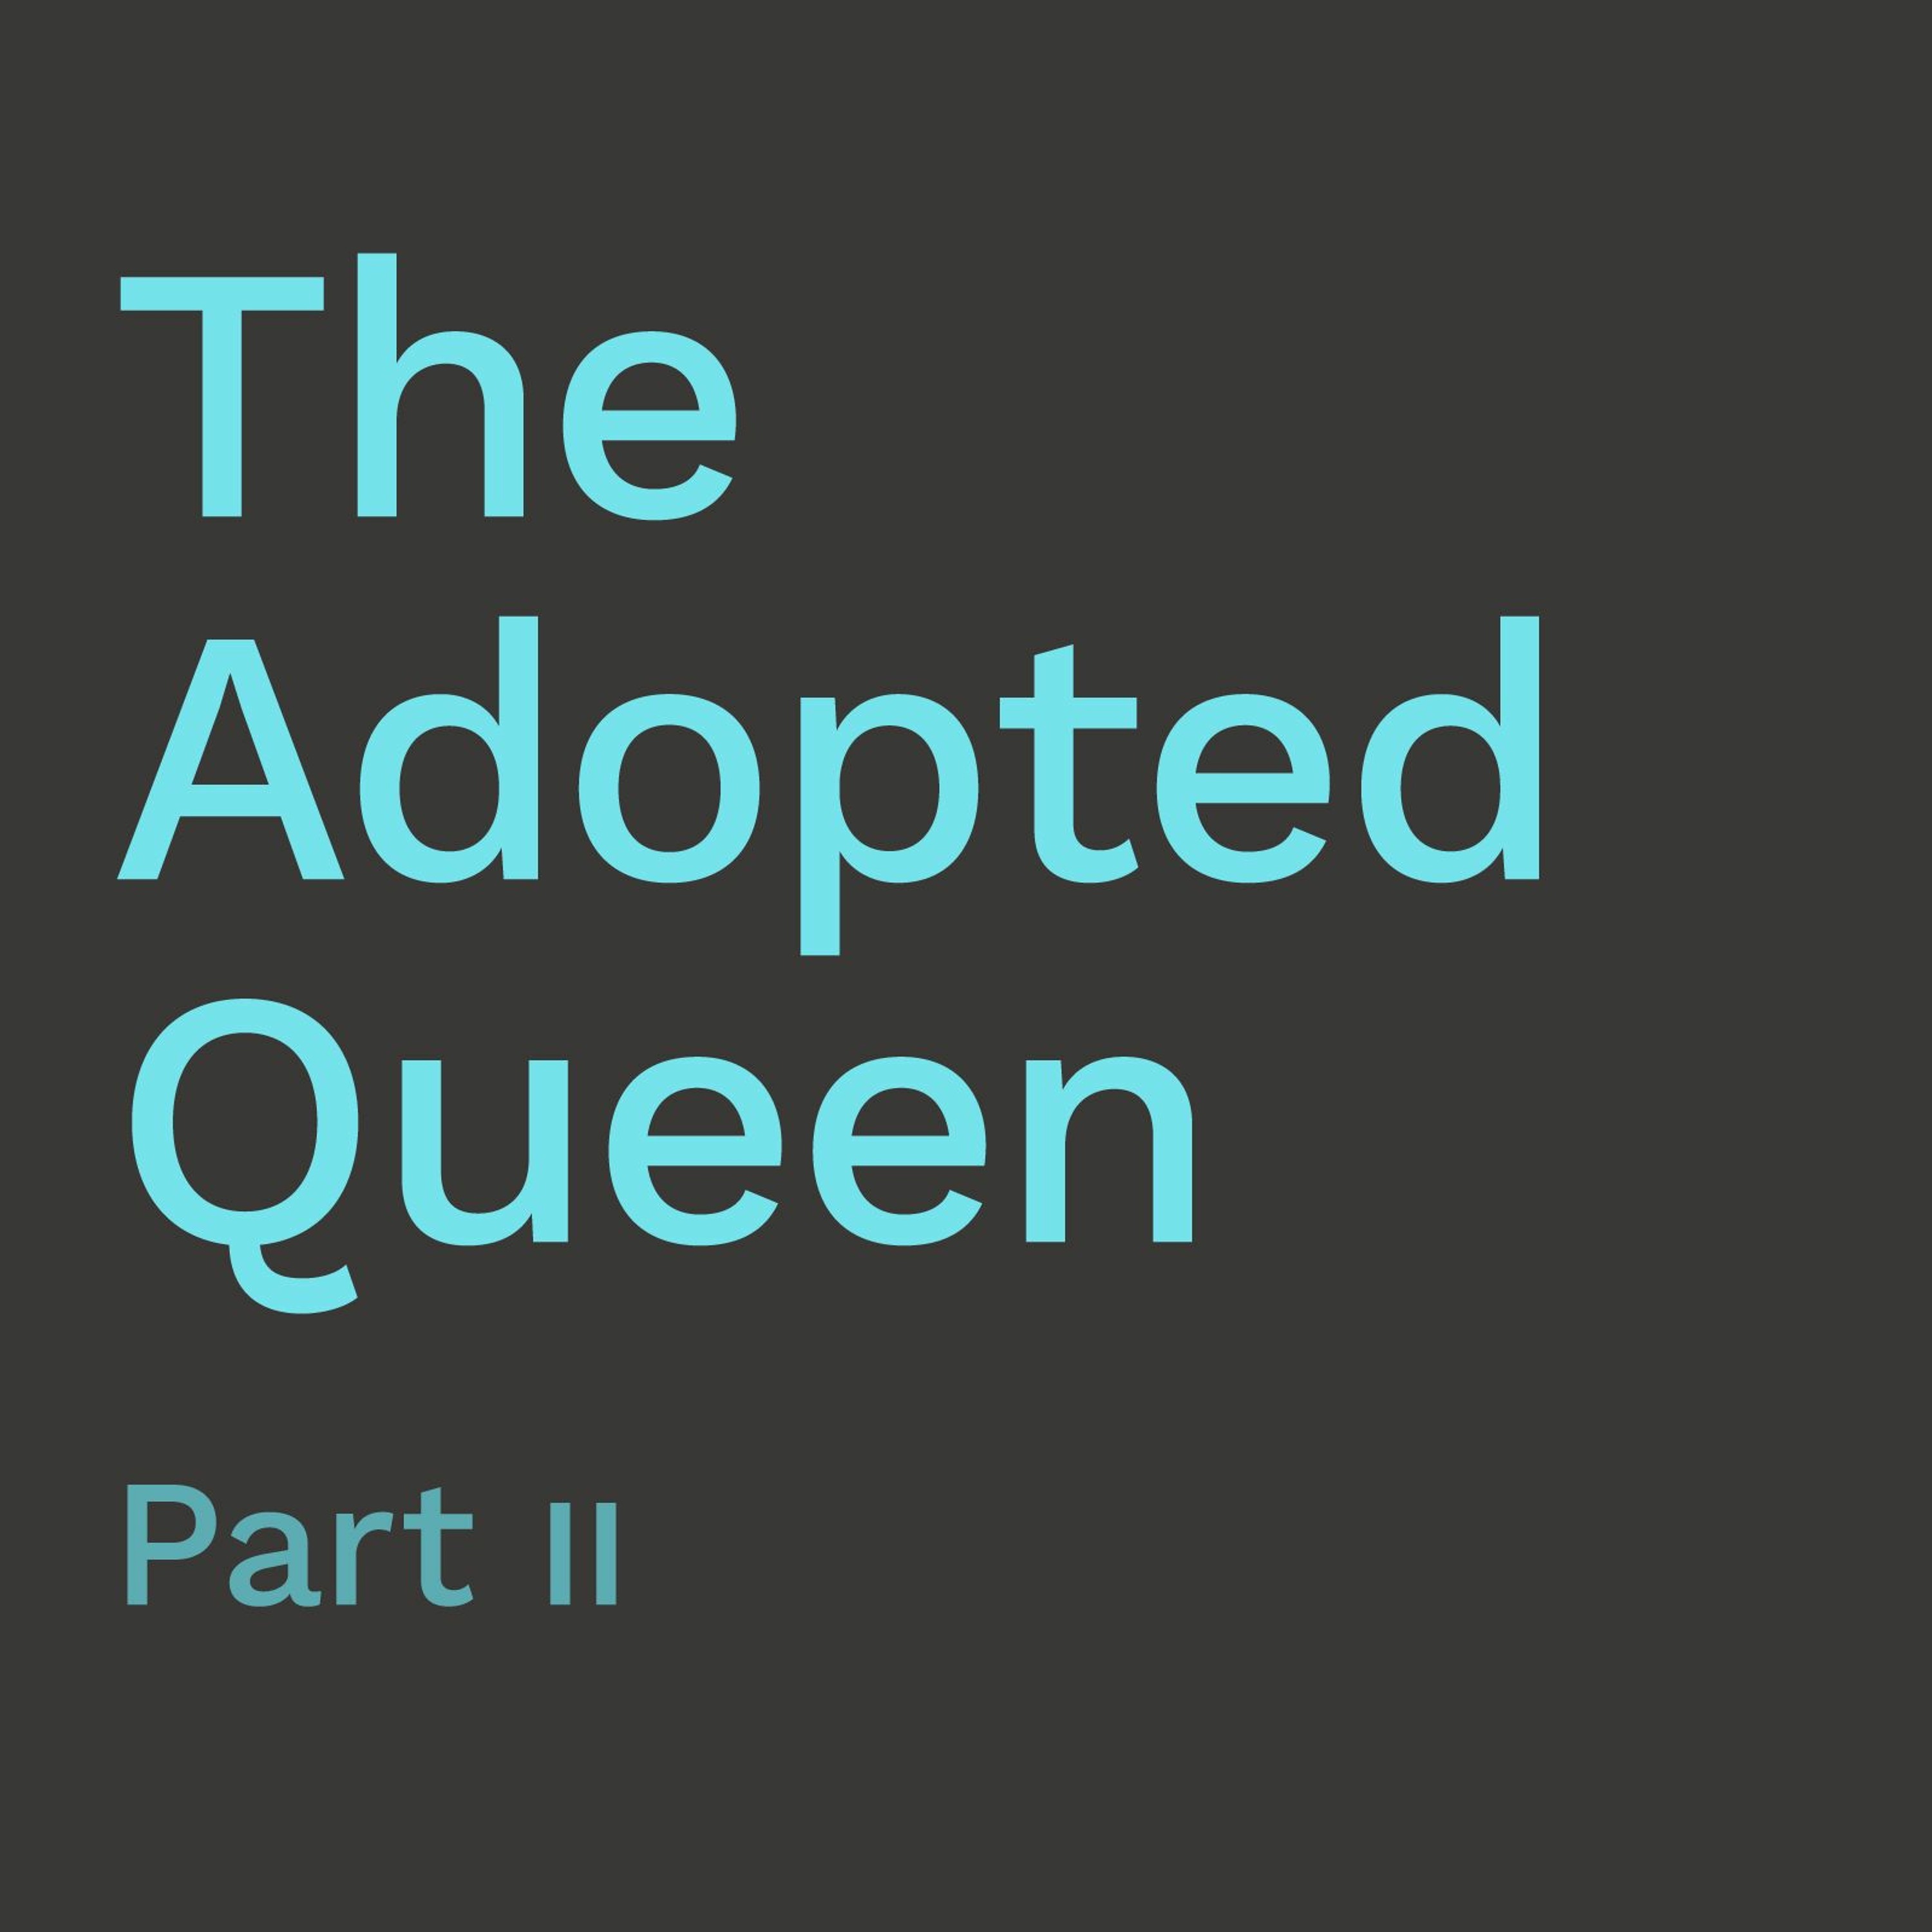 ’The Adopted Queen’ (Part 2) / Neville Garland